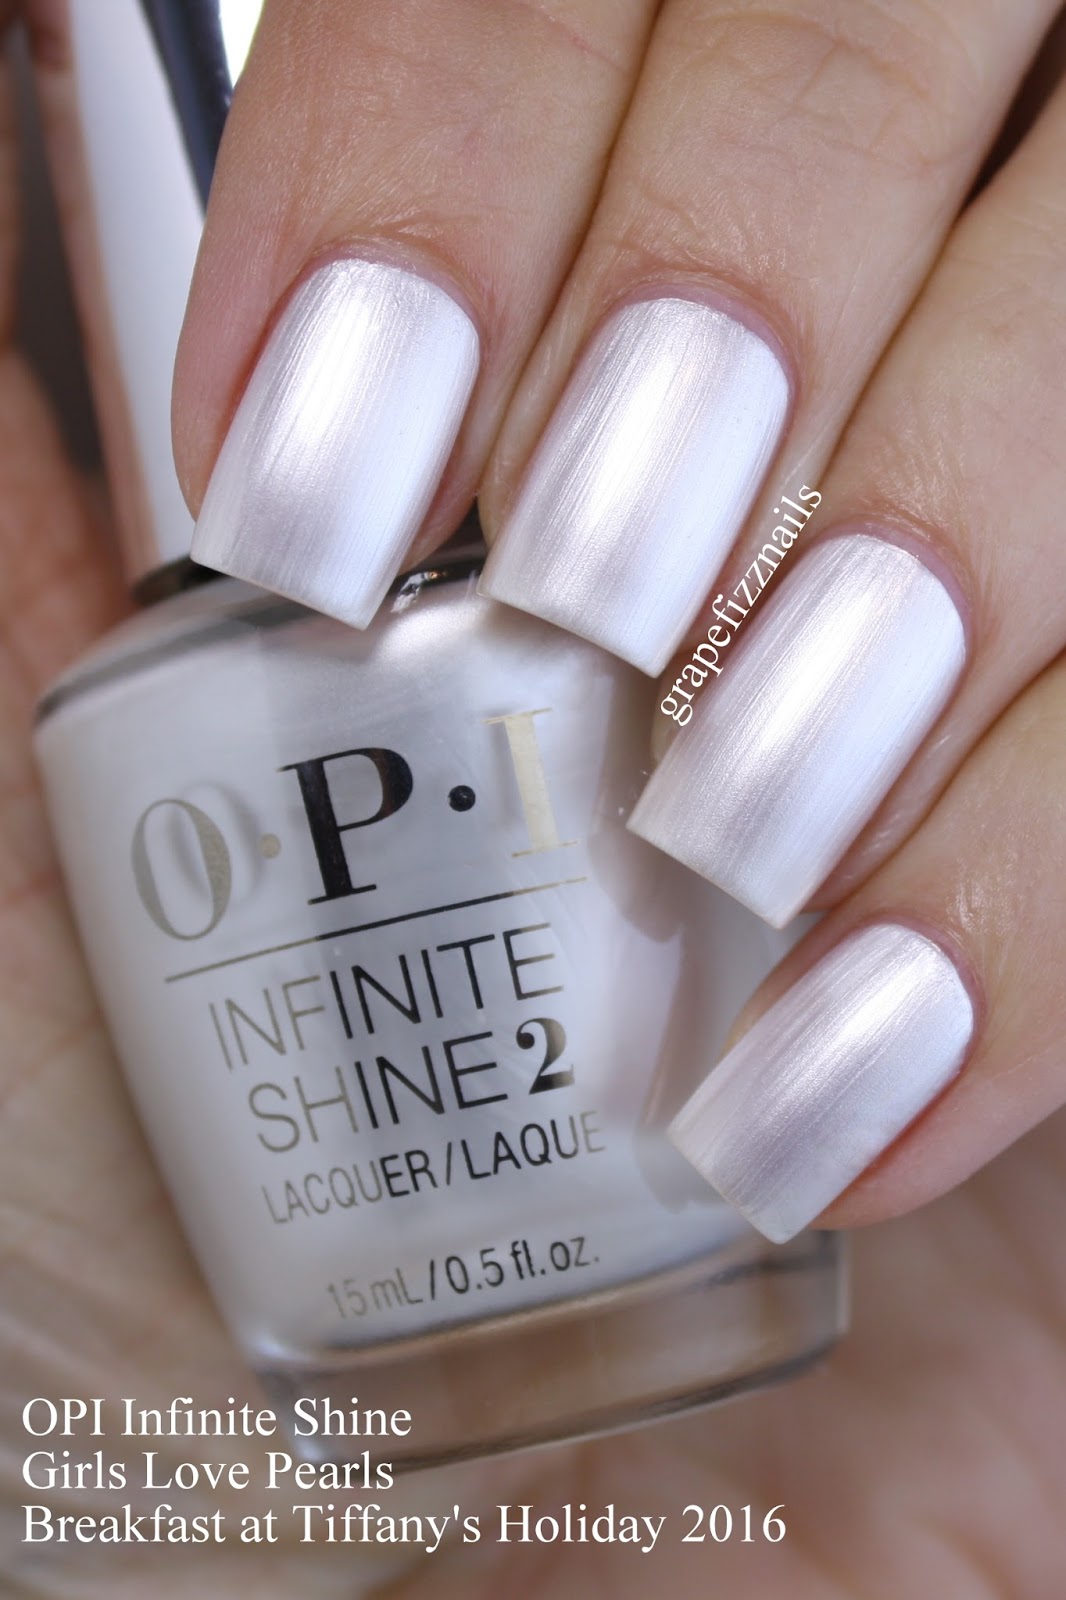 Grape Fizz Nails: OPI Breakfast at Tiffany's Holiday 2016 Swatches and  Review